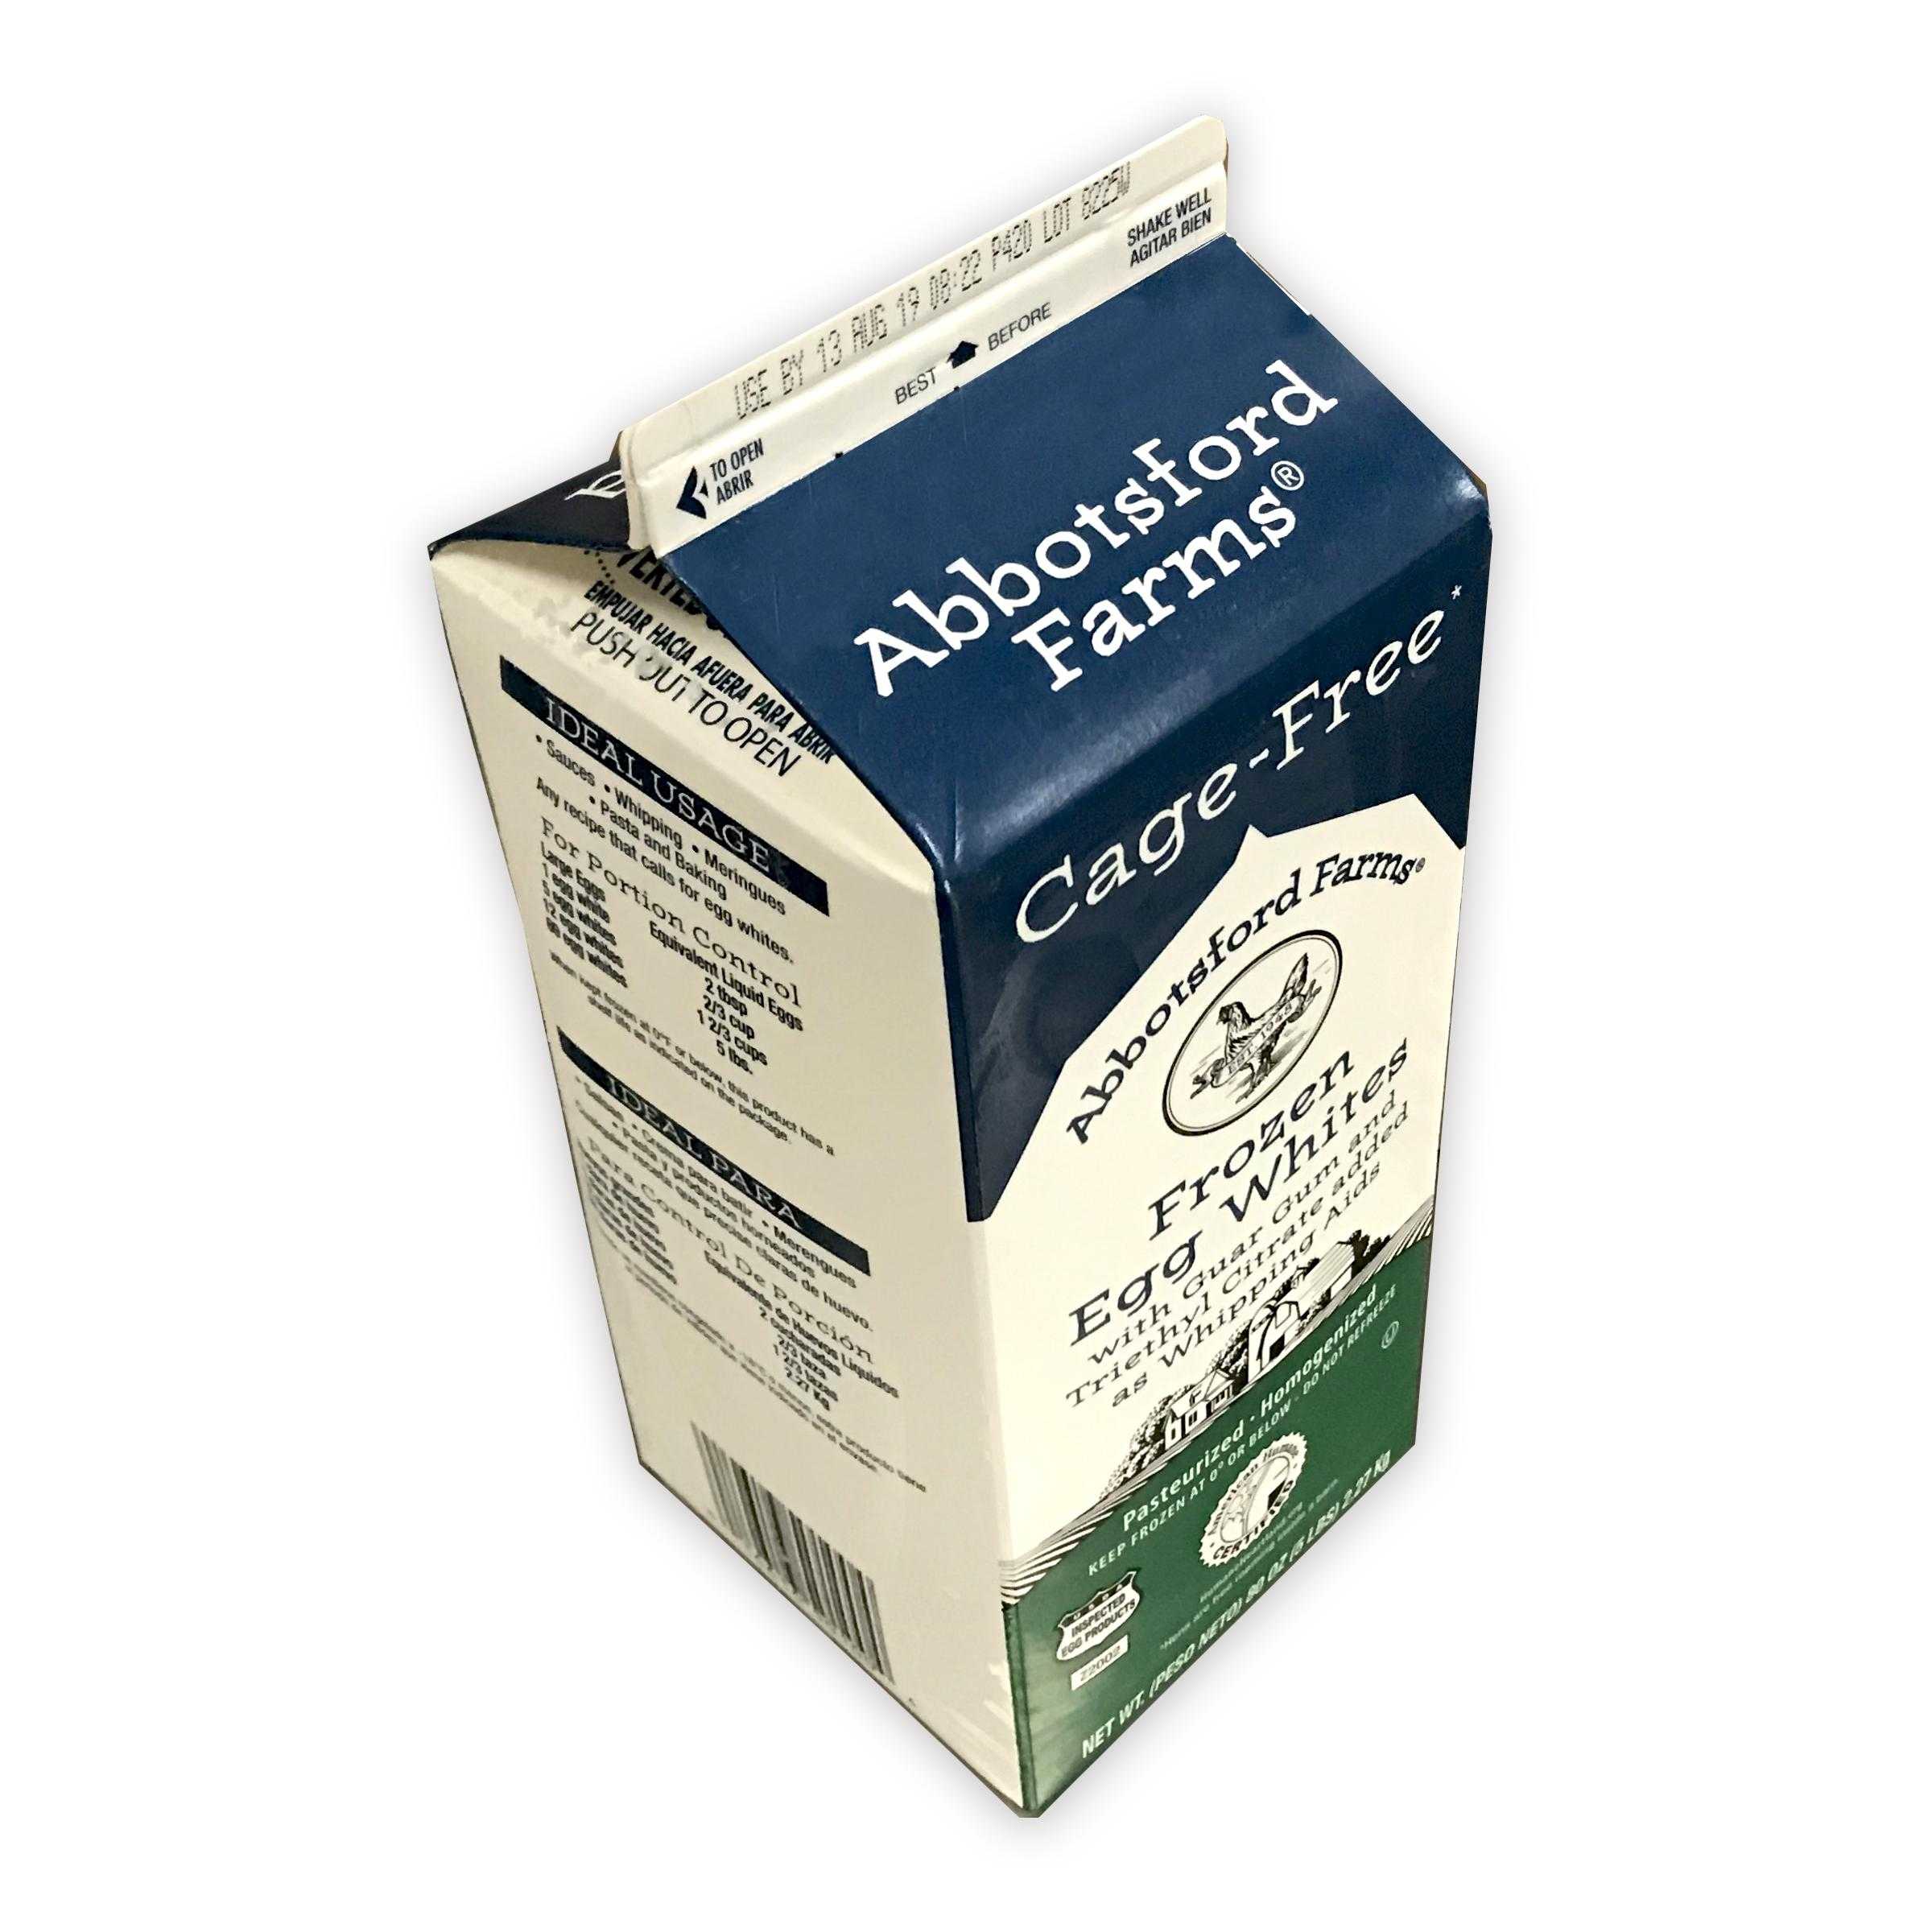 Abbotsford Farms® American Humane Certified Cage Free Frozen Liquid Whites with Triethyl Citrate and Guar Gum, 6/5 Lb Cartons